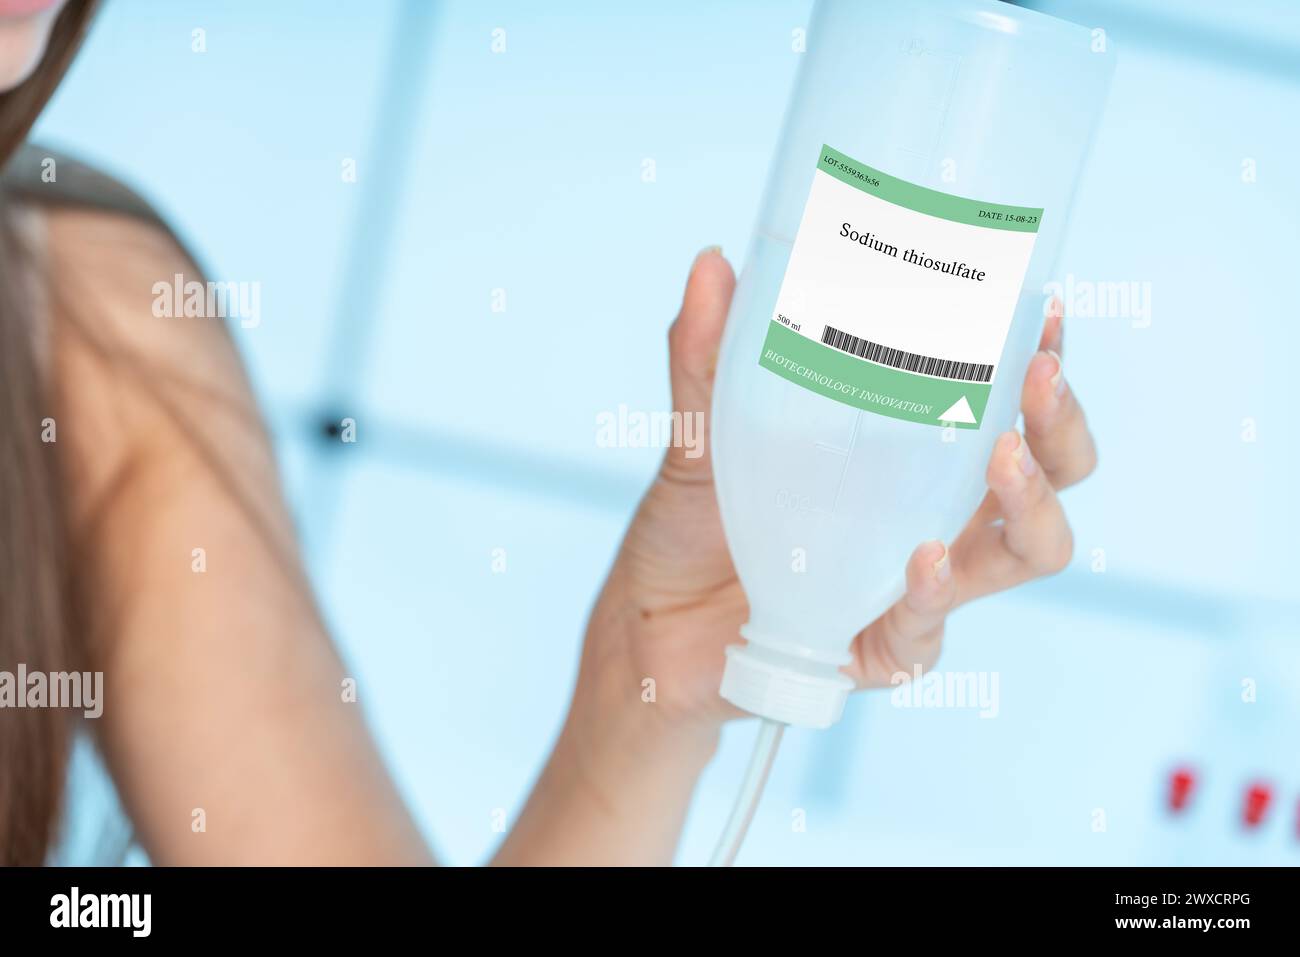 Sodium thiosulphate intravenous solution, conceptual image. Neutralizes cyanide toxicity and treats calciphylaxis in dialysis patients. Stock Photo